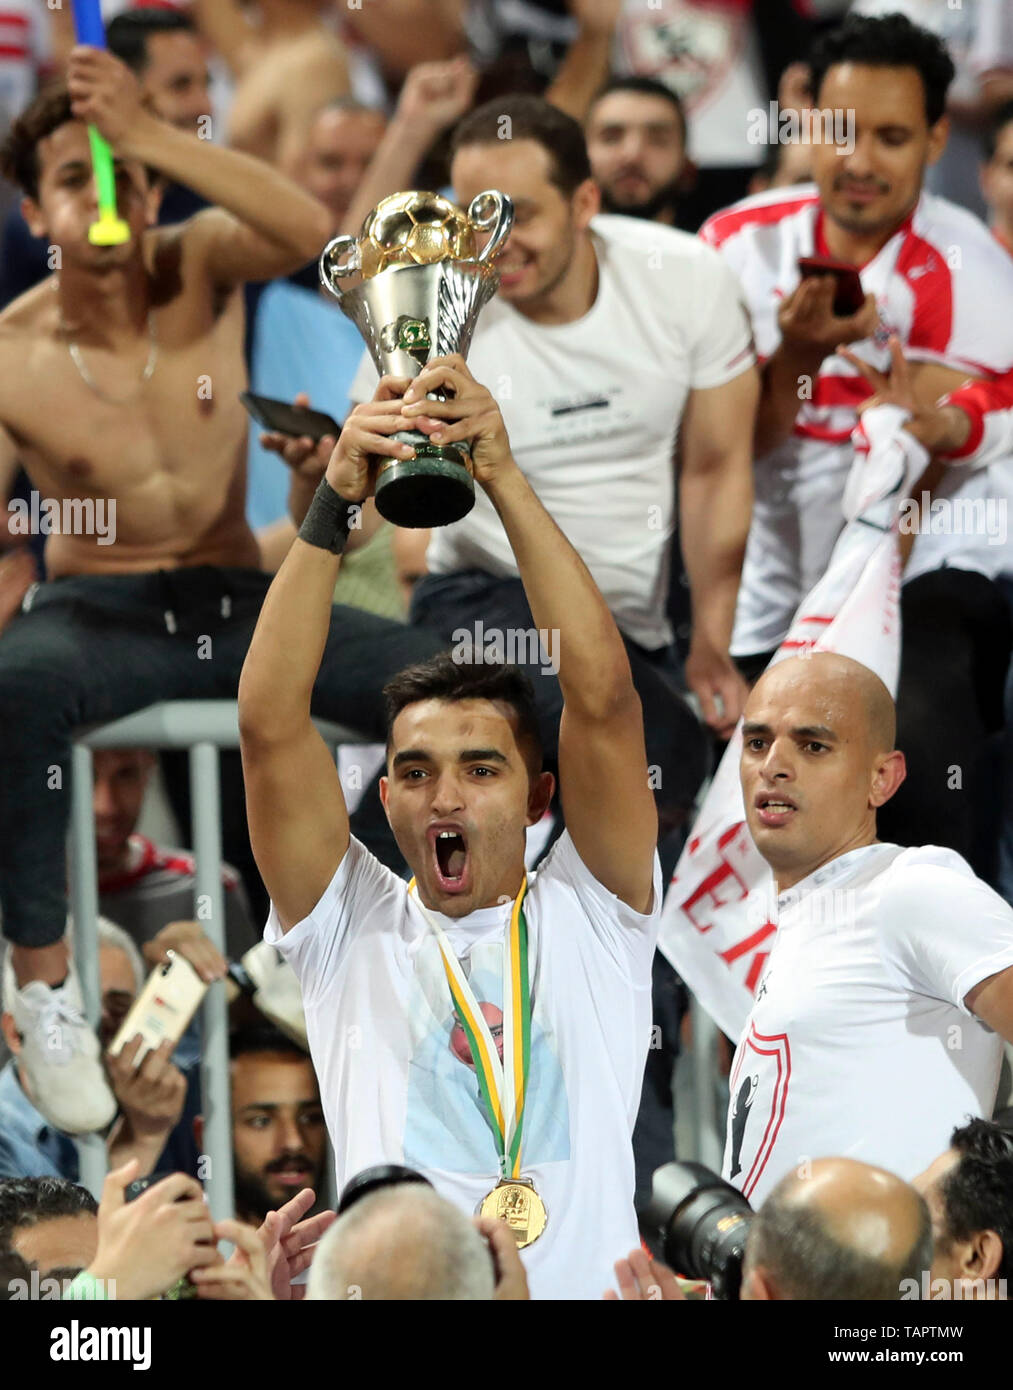 Alexandria. 26th May, 2019. Players of Zamalek celebrate after winning the 2019 CAF Confederation Cup final between Egypt's Zamalek and Morocco's RS Berkane in Alexandria, Egypt on May 26, 2019. Zamalek won their first-ever CAF Confederation Cup title after a 5-3 penalty shootout win over Morocco's RS Berkane. Credit: Ahmed Gomaa/Xinhua/Alamy Live News Stock Photo